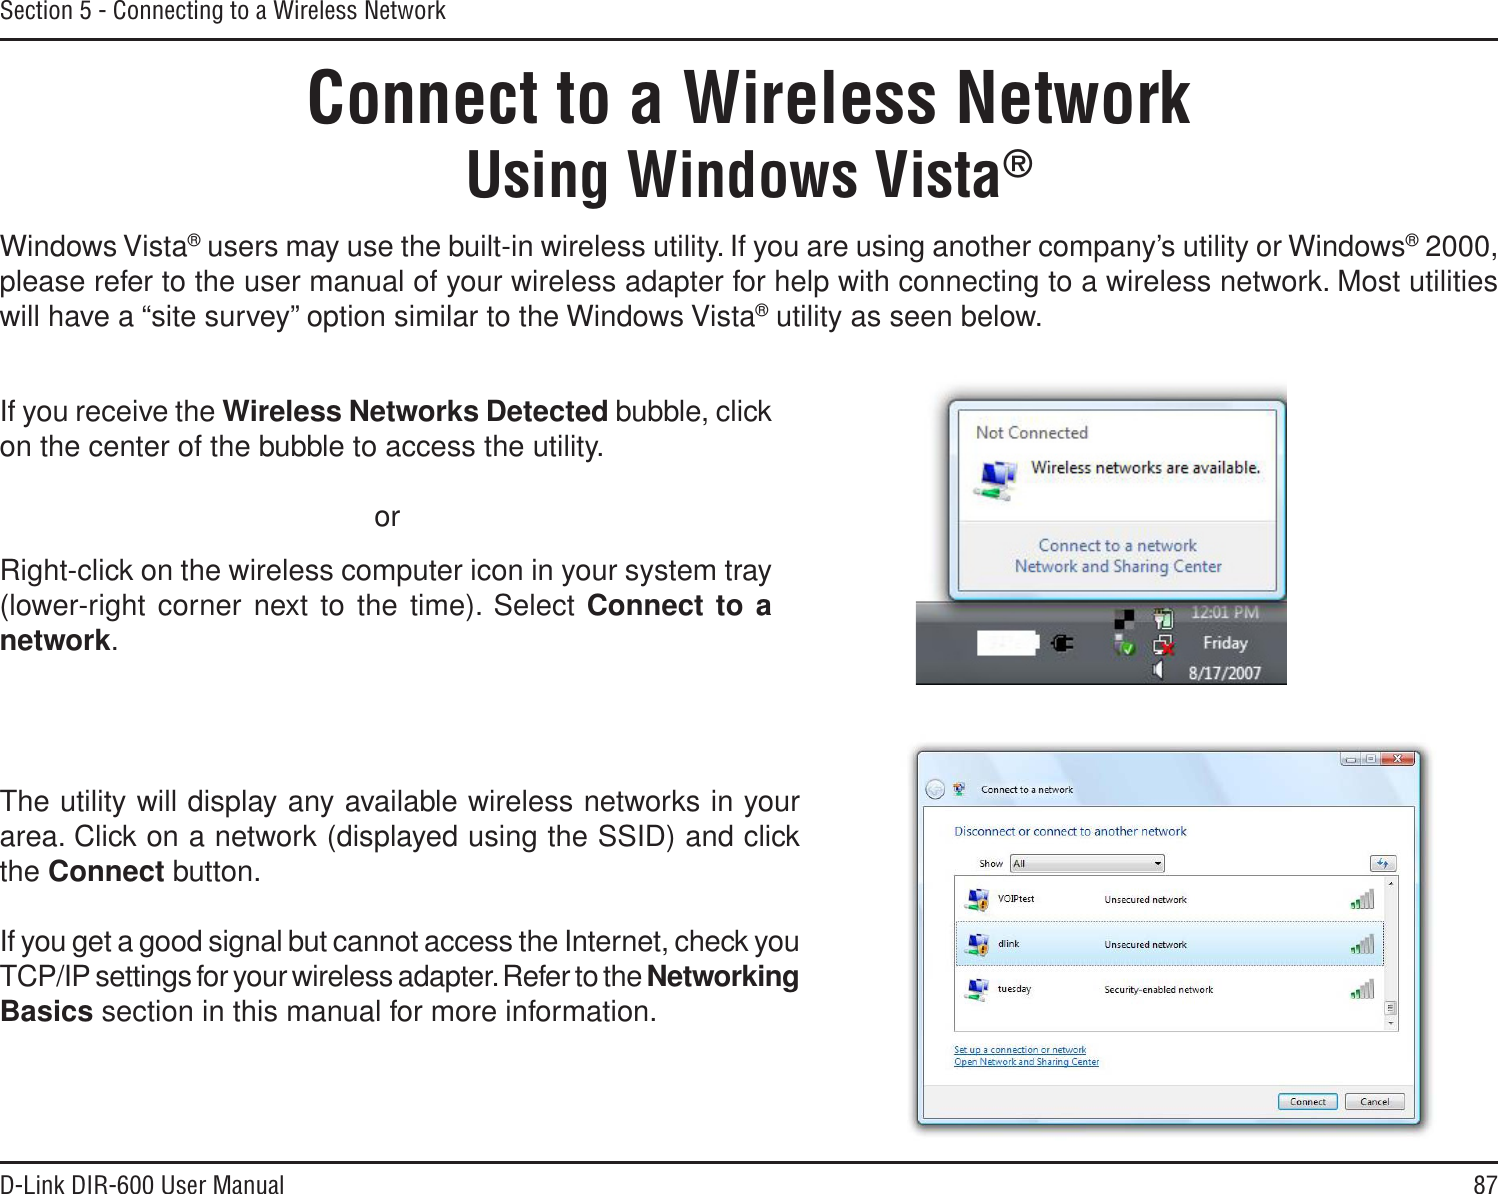 87D-Link DIR-600 User ManualSection 5 - Connecting to a Wireless NetworkConnect to a Wireless NetworkUsing Windows Vista®Windows Vista® users may use the built-in wireless utility. If you are using another company’s utility or Windows® 2000, please refer to the user manual of your wireless adapter for help with connecting to a wireless network. Most utilities will have a “site survey” option similar to the Windows Vista® utility as seen below.Right-click on the wireless computer icon in your system tray (lower-right corner next to the time). Select Connect to anetwork.If you receive the Wireless Networks Detected bubble, click on the center of the bubble to access the utility.     orThe utility will display any available wireless networks in your area. Click on a network (displayed using the SSID) and click the Connect button.If you get a good signal but cannot access the Internet, check you TCP/IP settings for your wireless adapter. Refer to the NetworkingBasics section in this manual for more information.